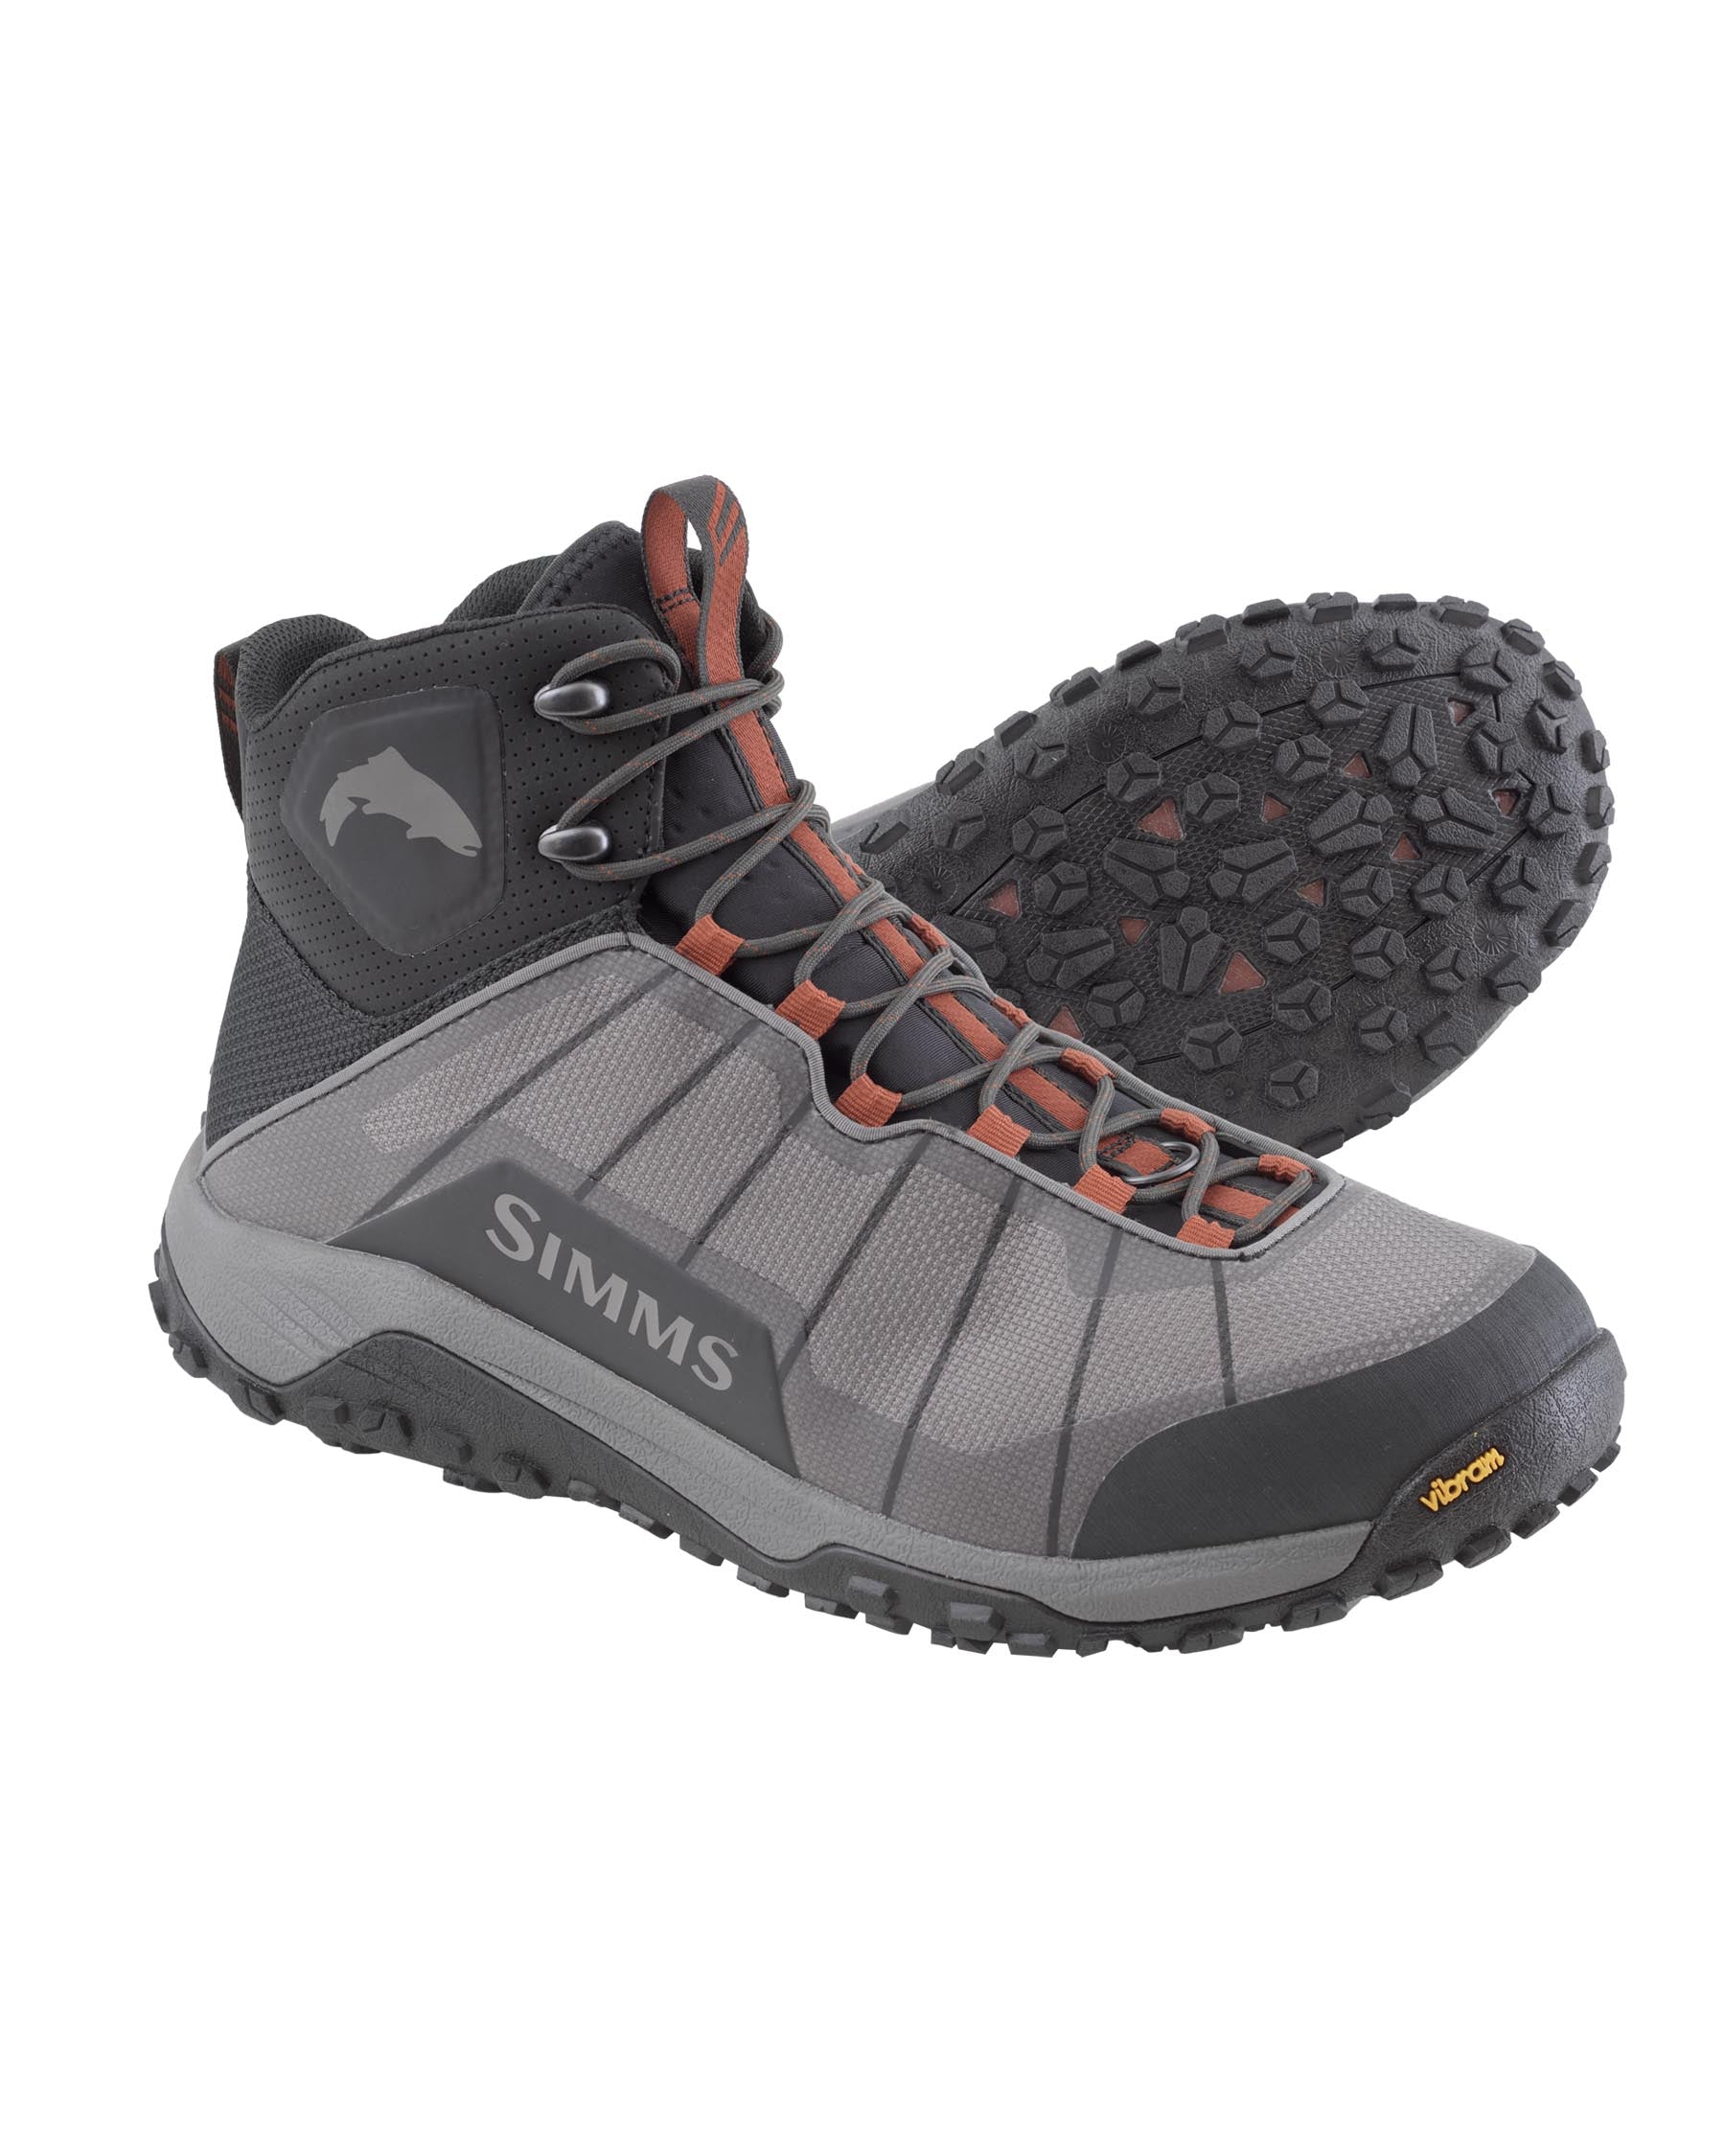 M's Flyweight® Wading Boot - Vibram Sole | Simms Fishing Products